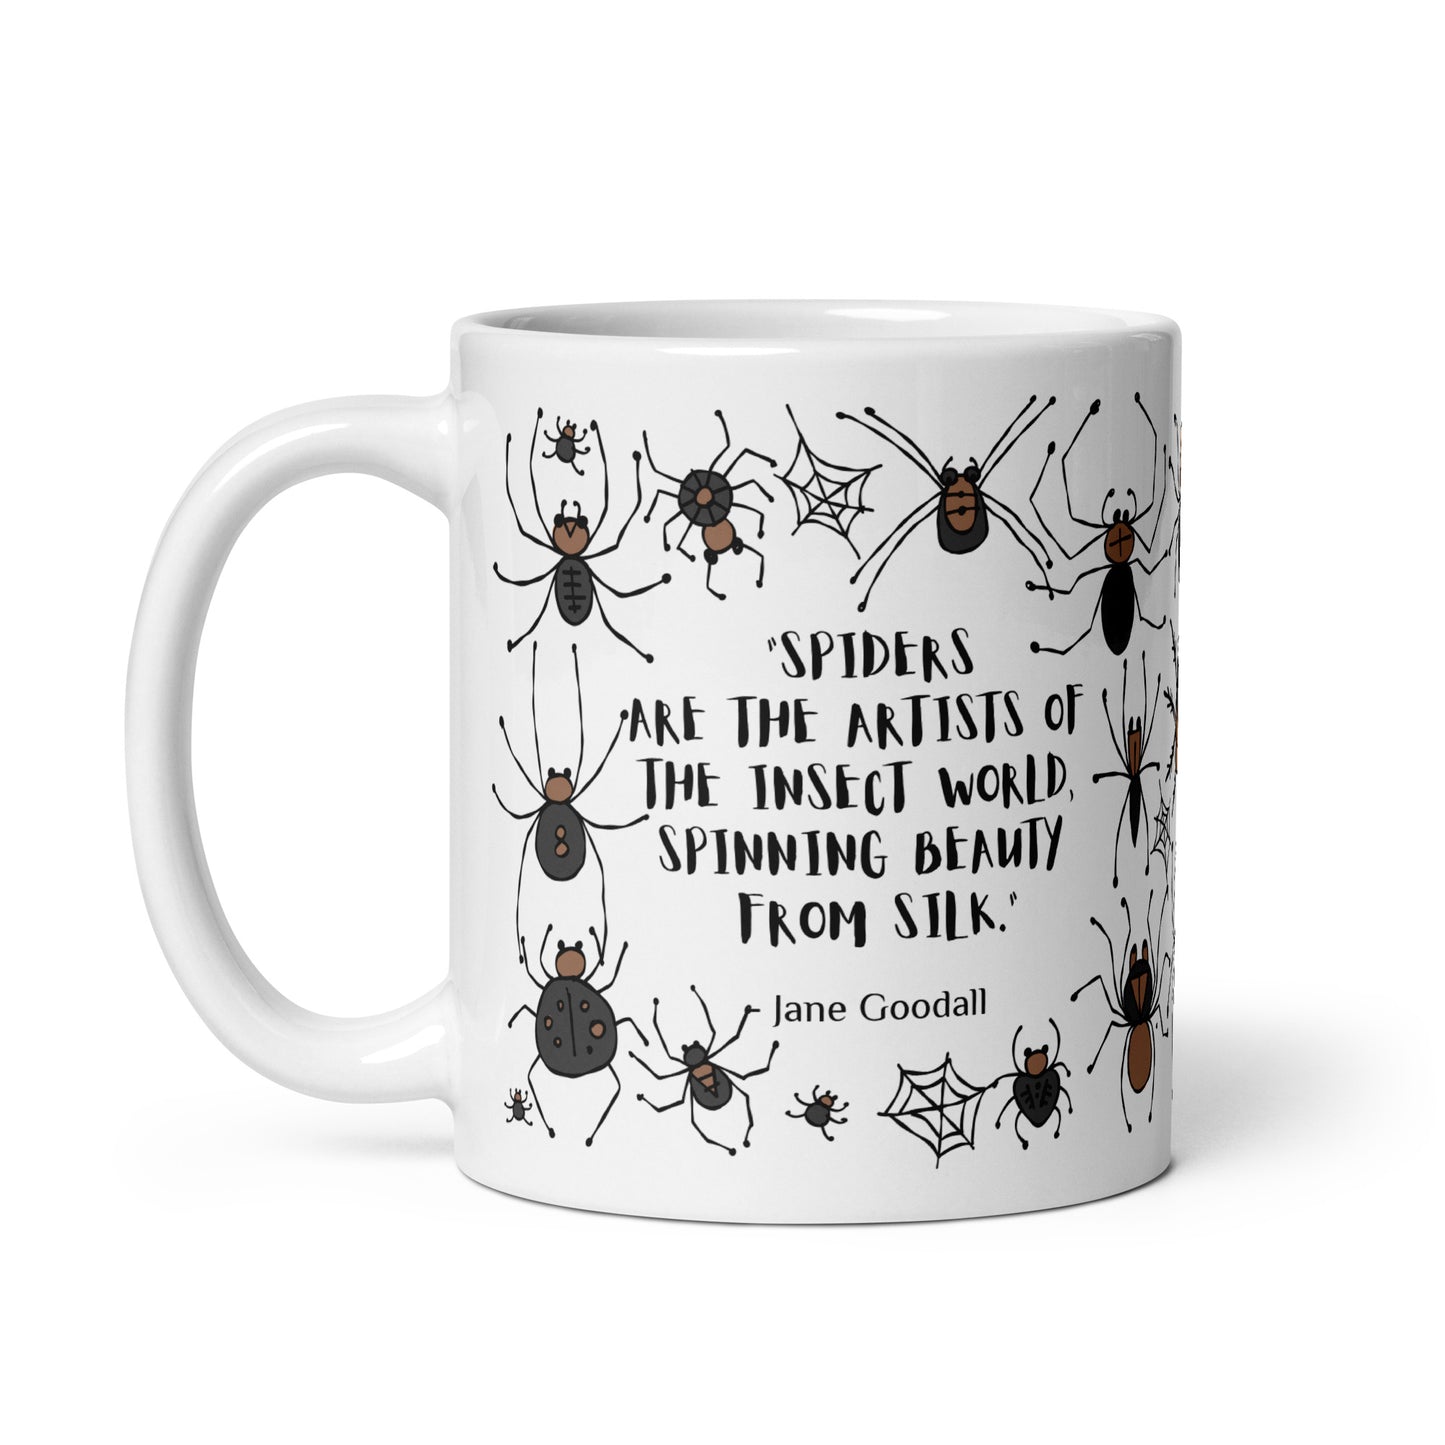 Personalised Ceramic mug 11oz spiders for Arachnologist. Quote on mug: "Spiders are the artists of the insect world, spinning beauty from silk." - Jane Goodall